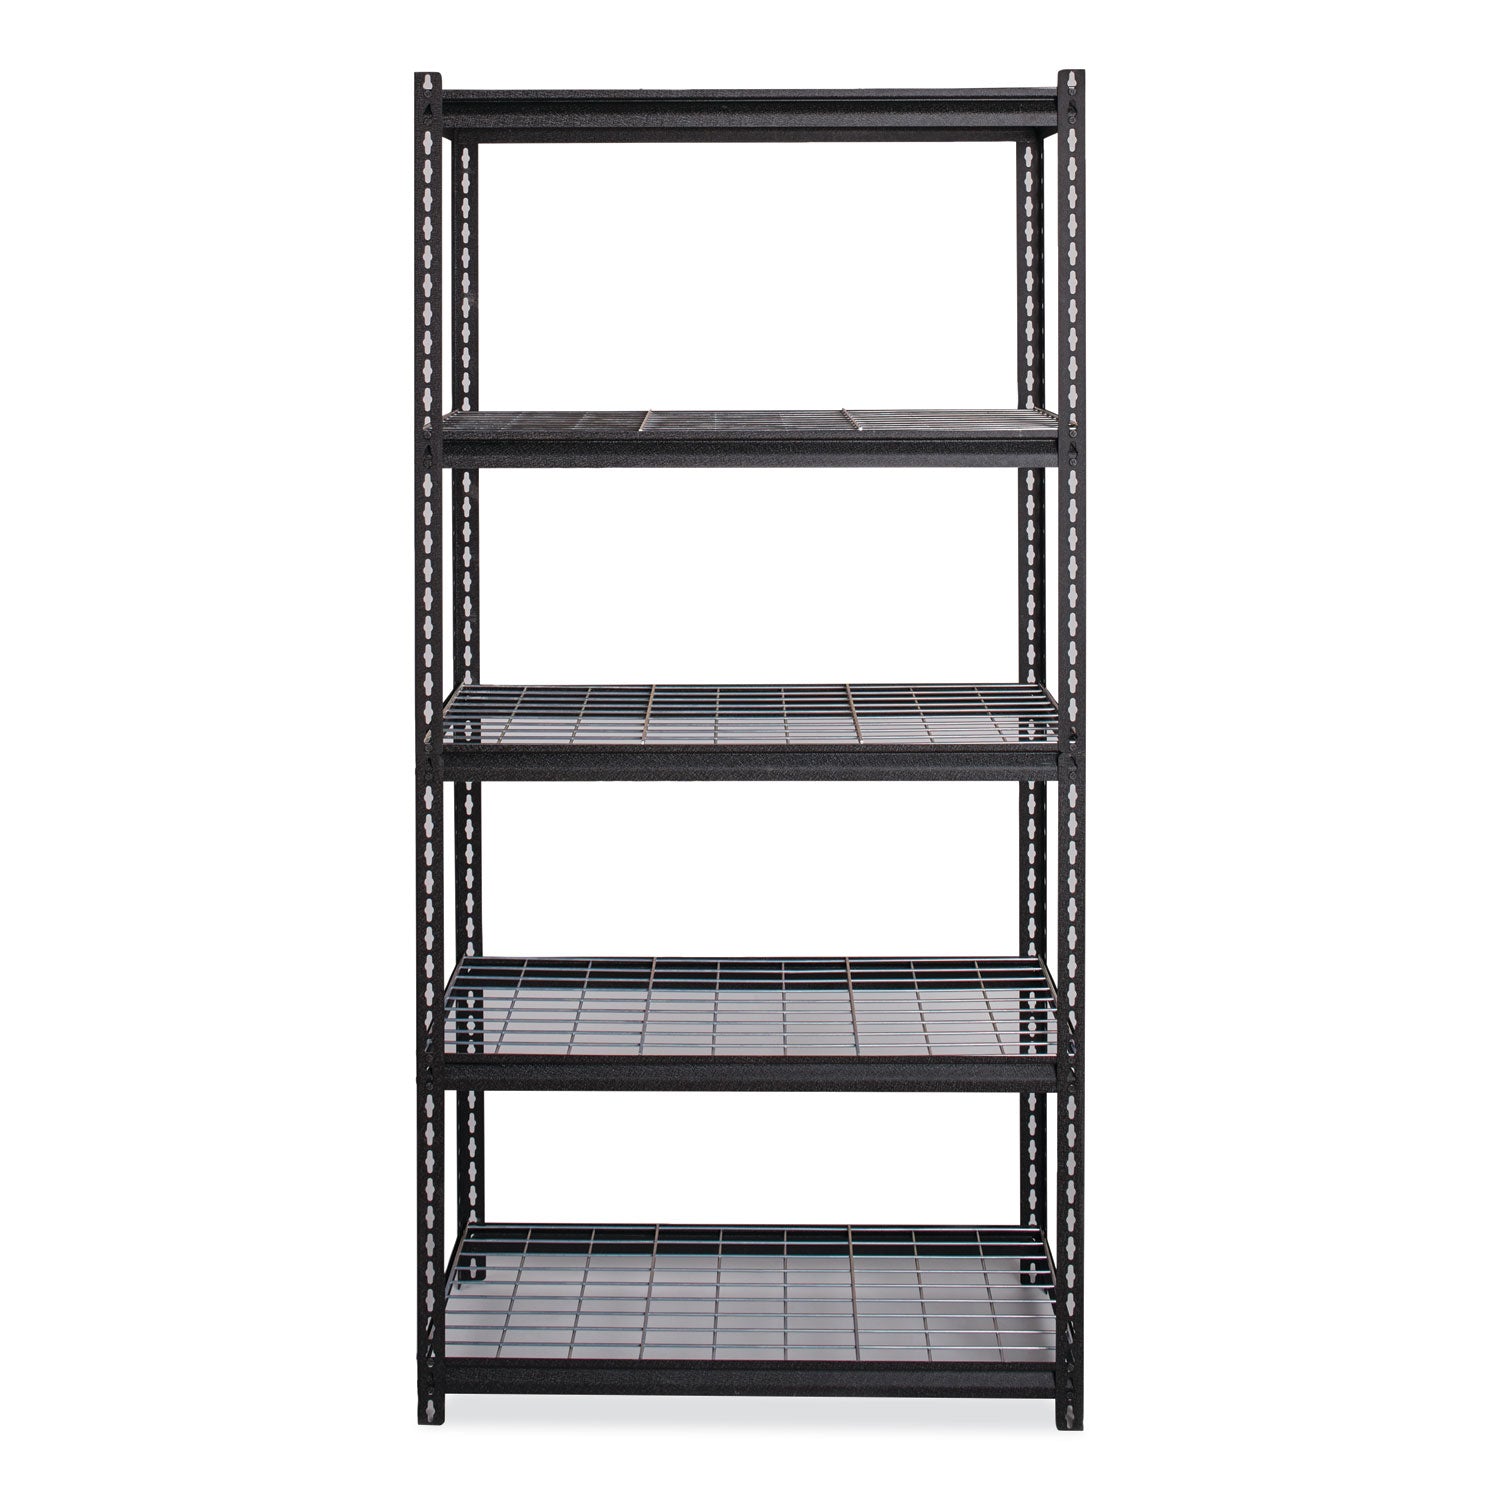 iron-horse-2300-wire-deck-shelving-five-shelf-36w-x-18d-x-72h-black-ships-in-4-6-business-days_hid22130 - 3